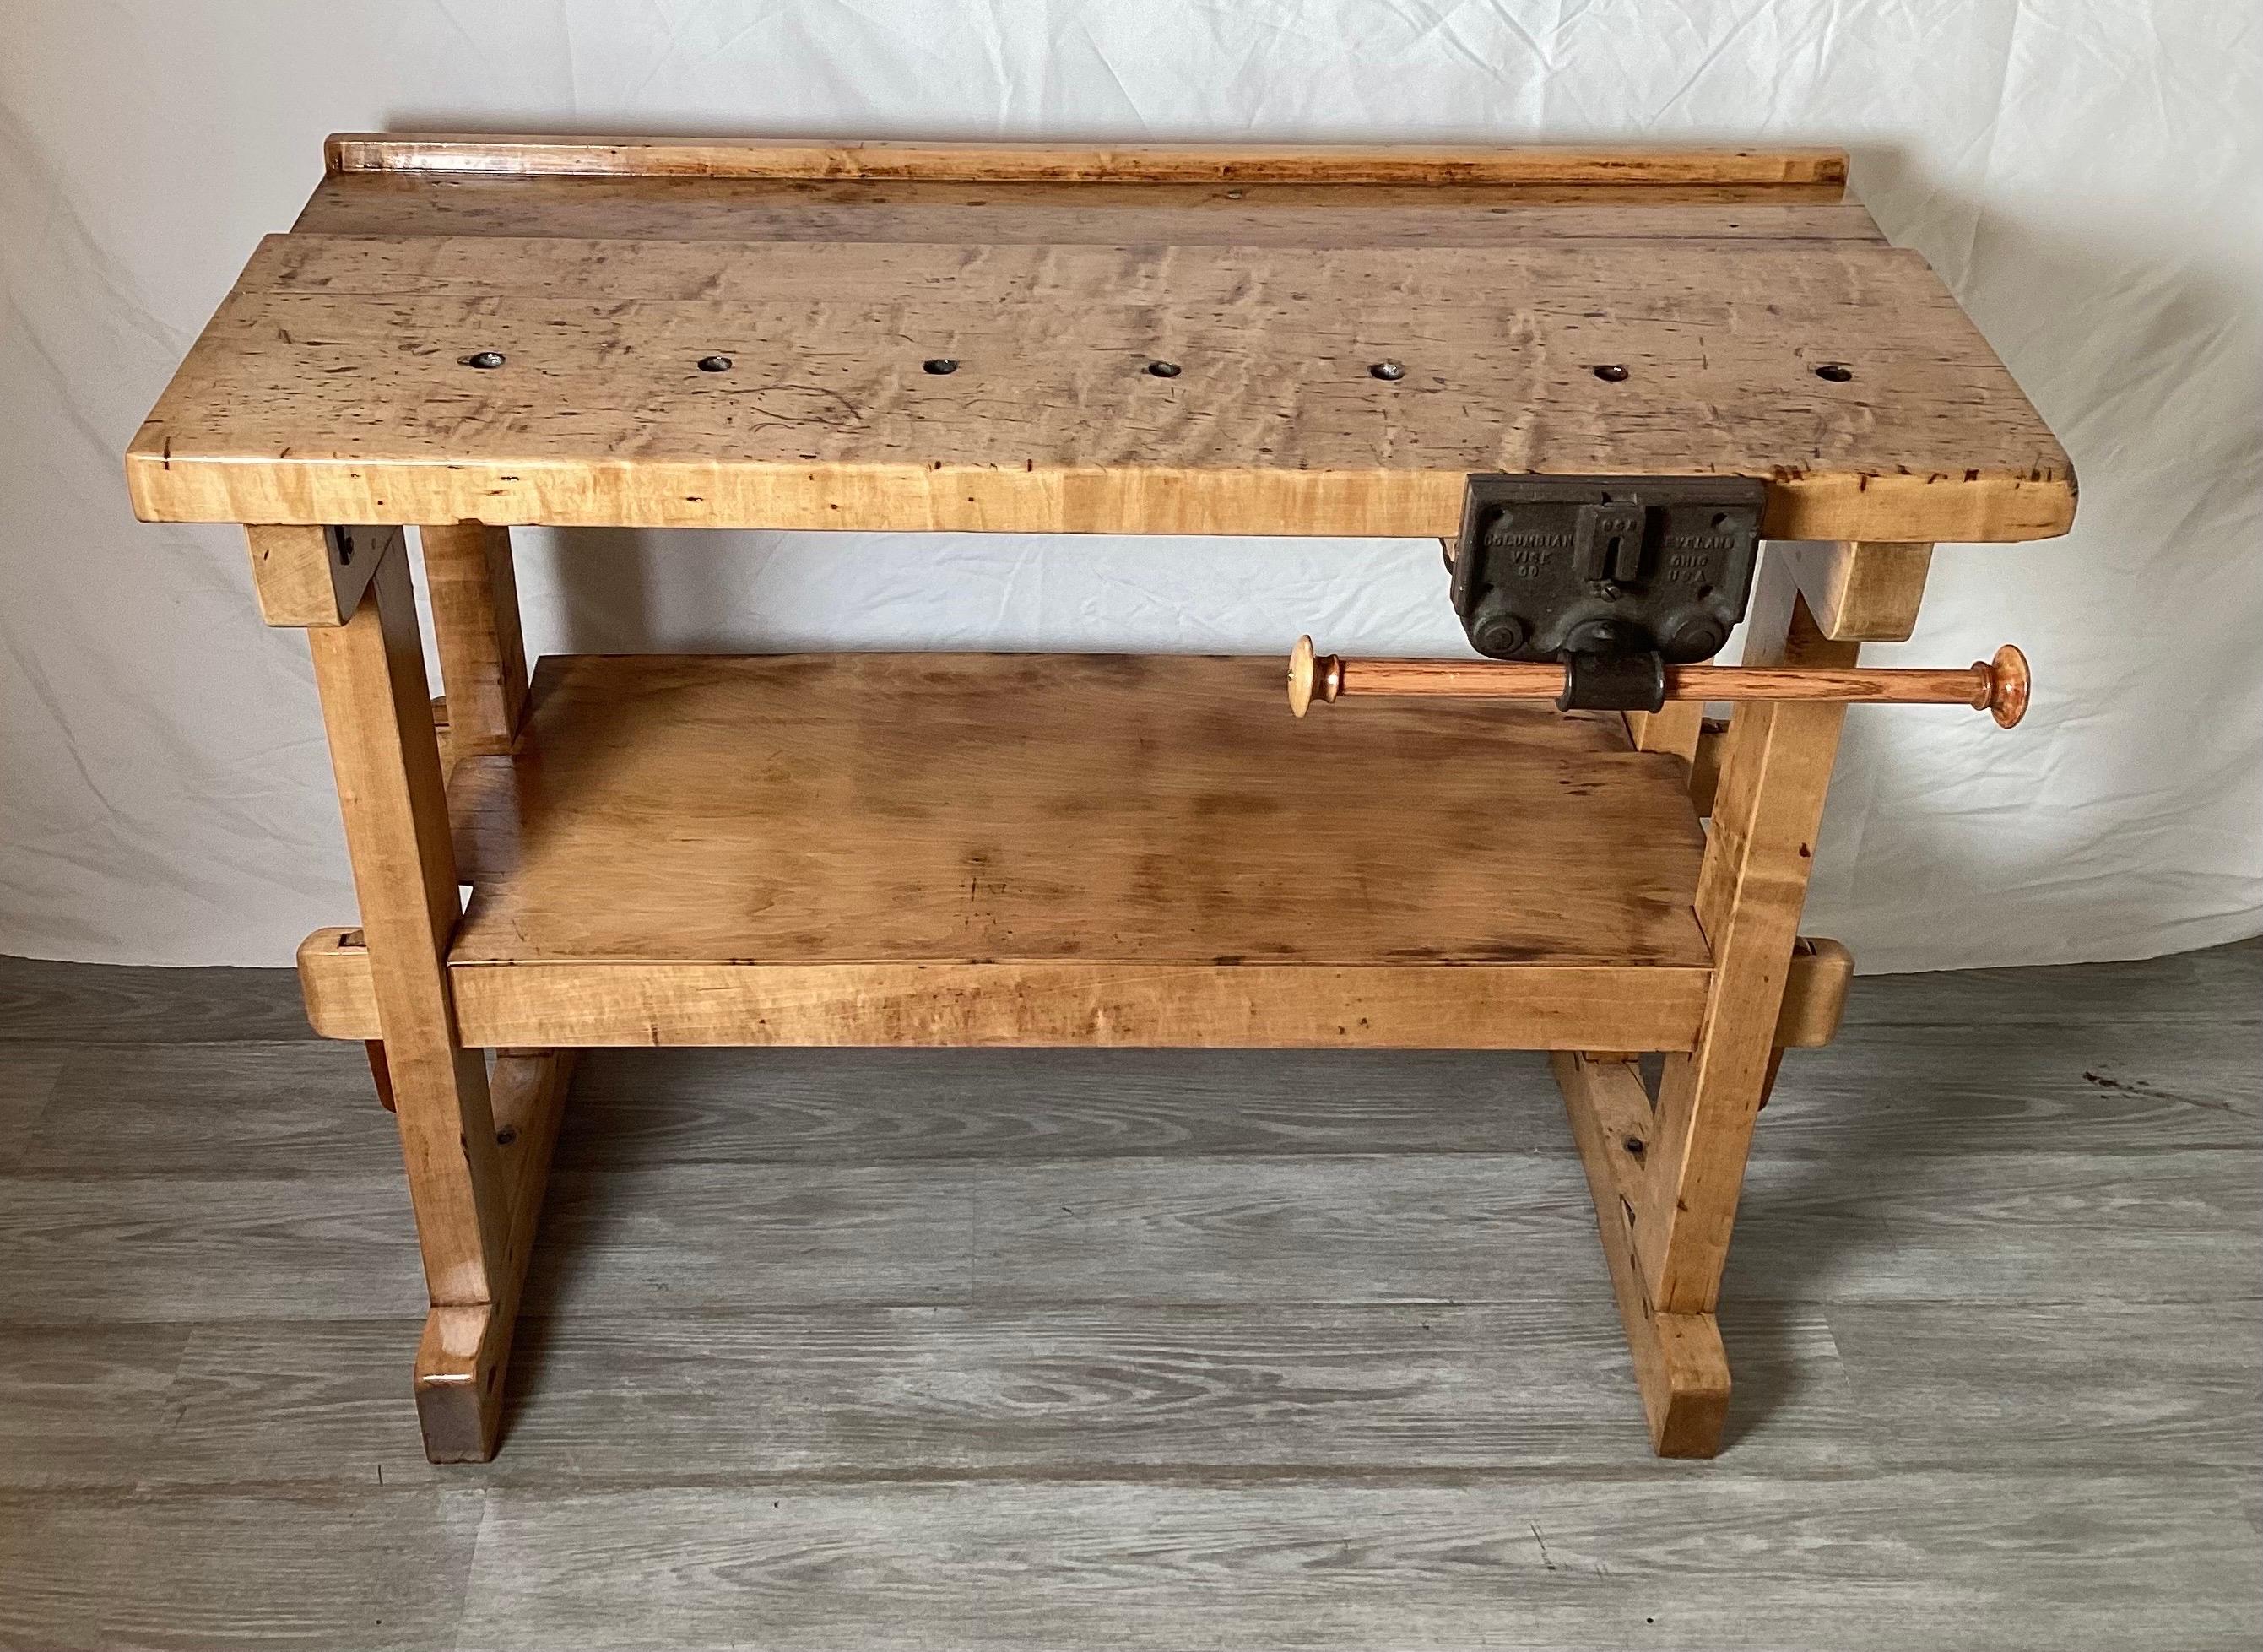 A diminutive solid American maple workbench with vice. The smaller size, 41 inches wide with refurbished finish but still retaining all the character of age and use.